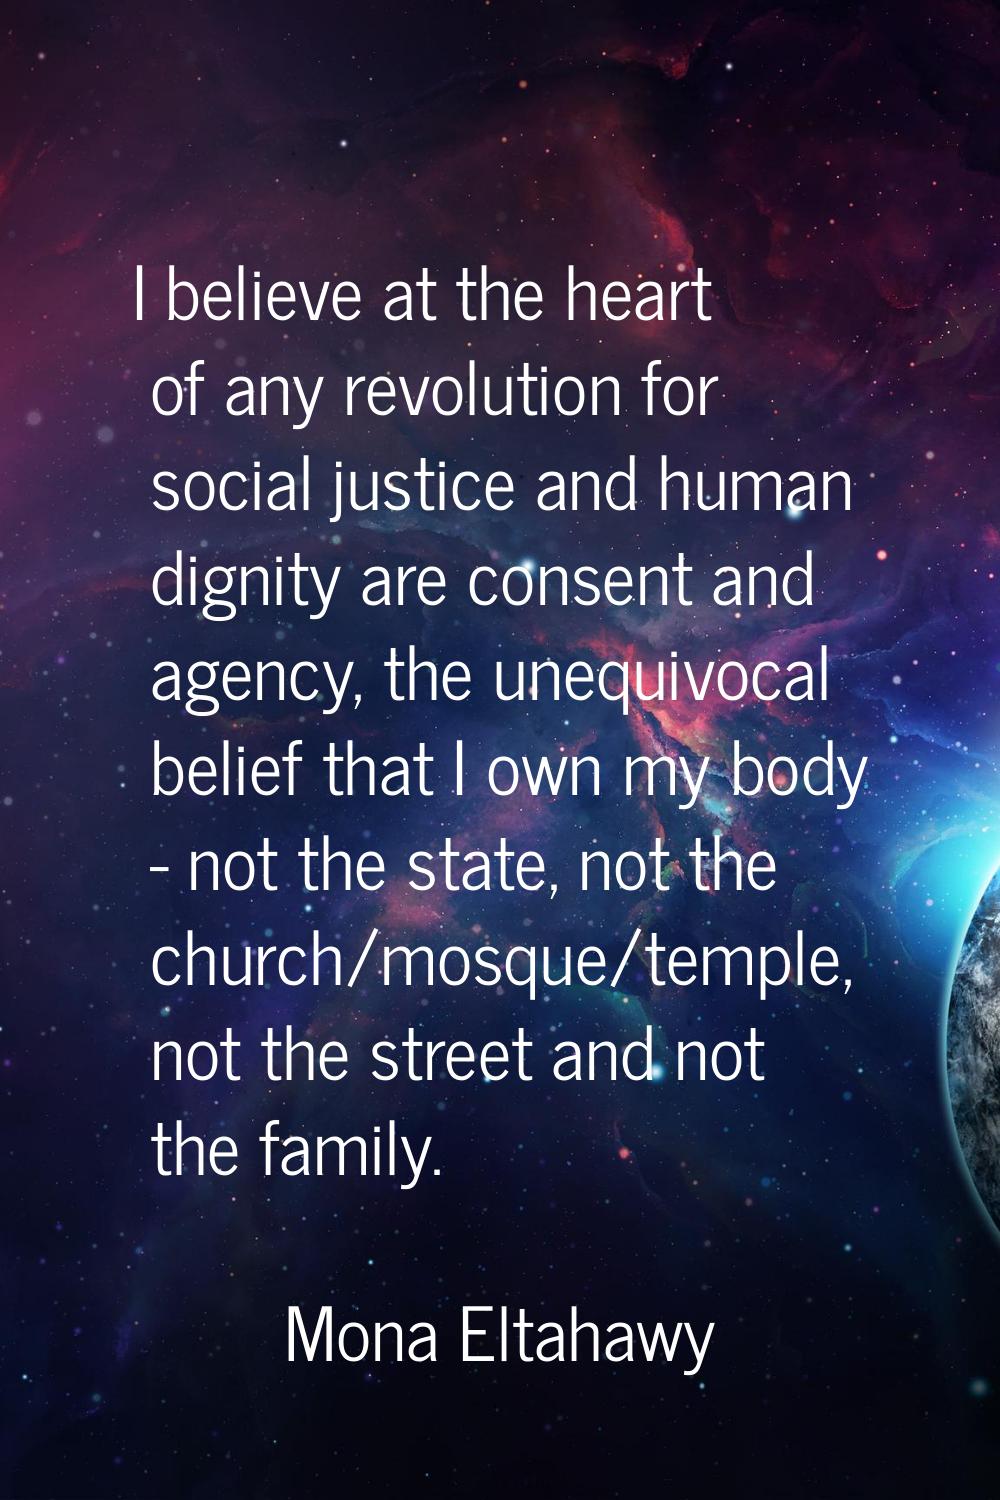 I believe at the heart of any revolution for social justice and human dignity are consent and agenc